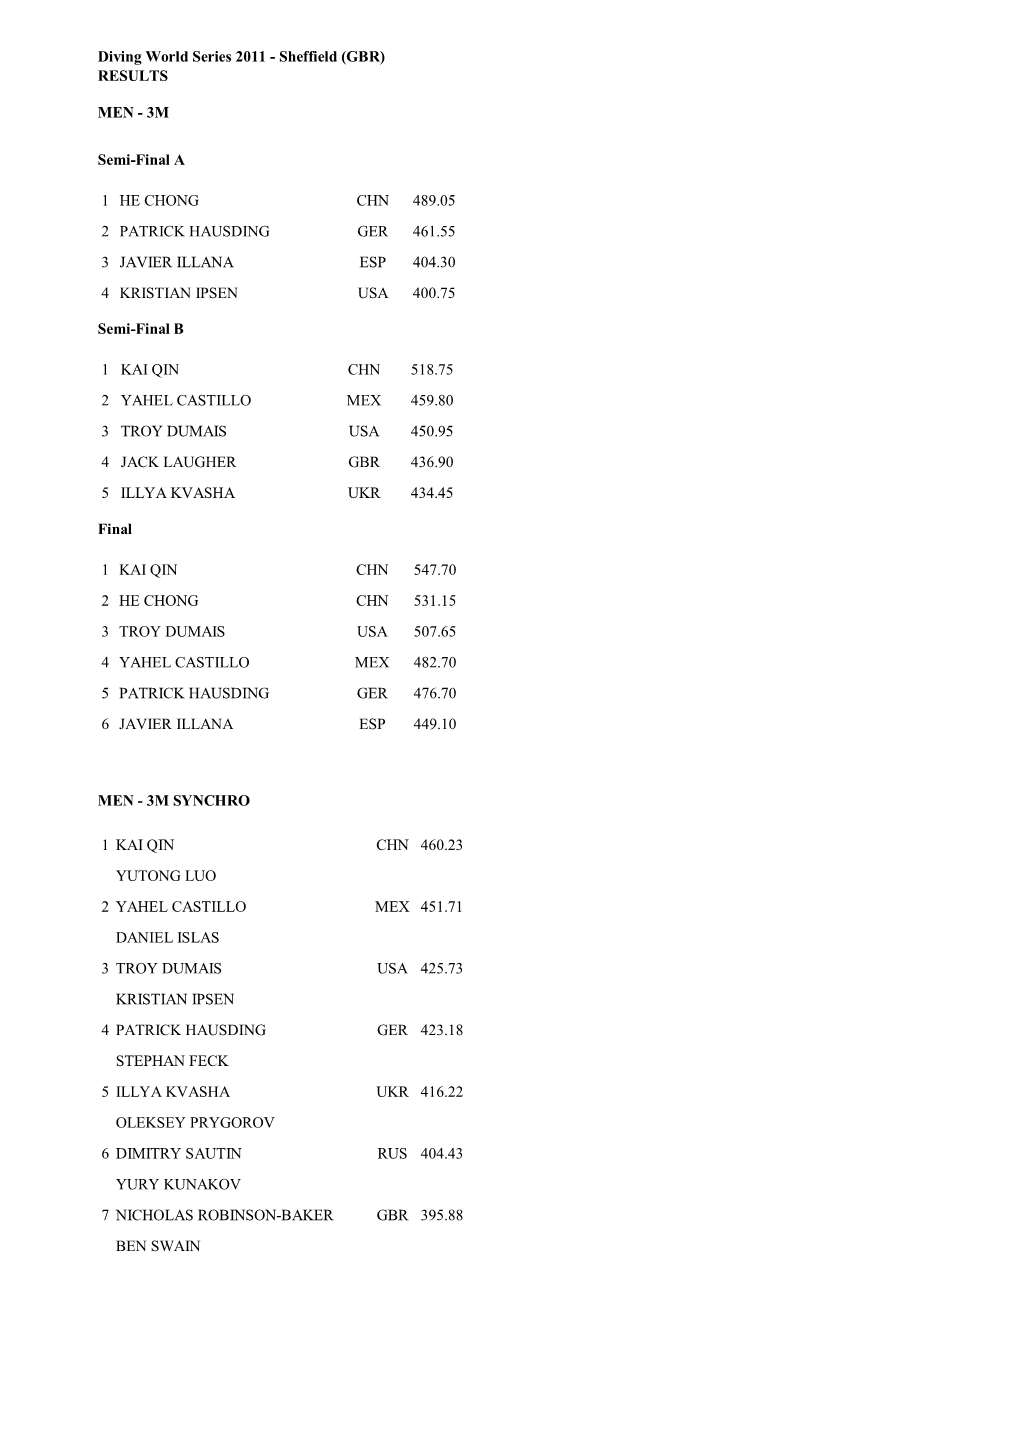 Diving World Series 2011 - Sheffield (GBR) RESULTS